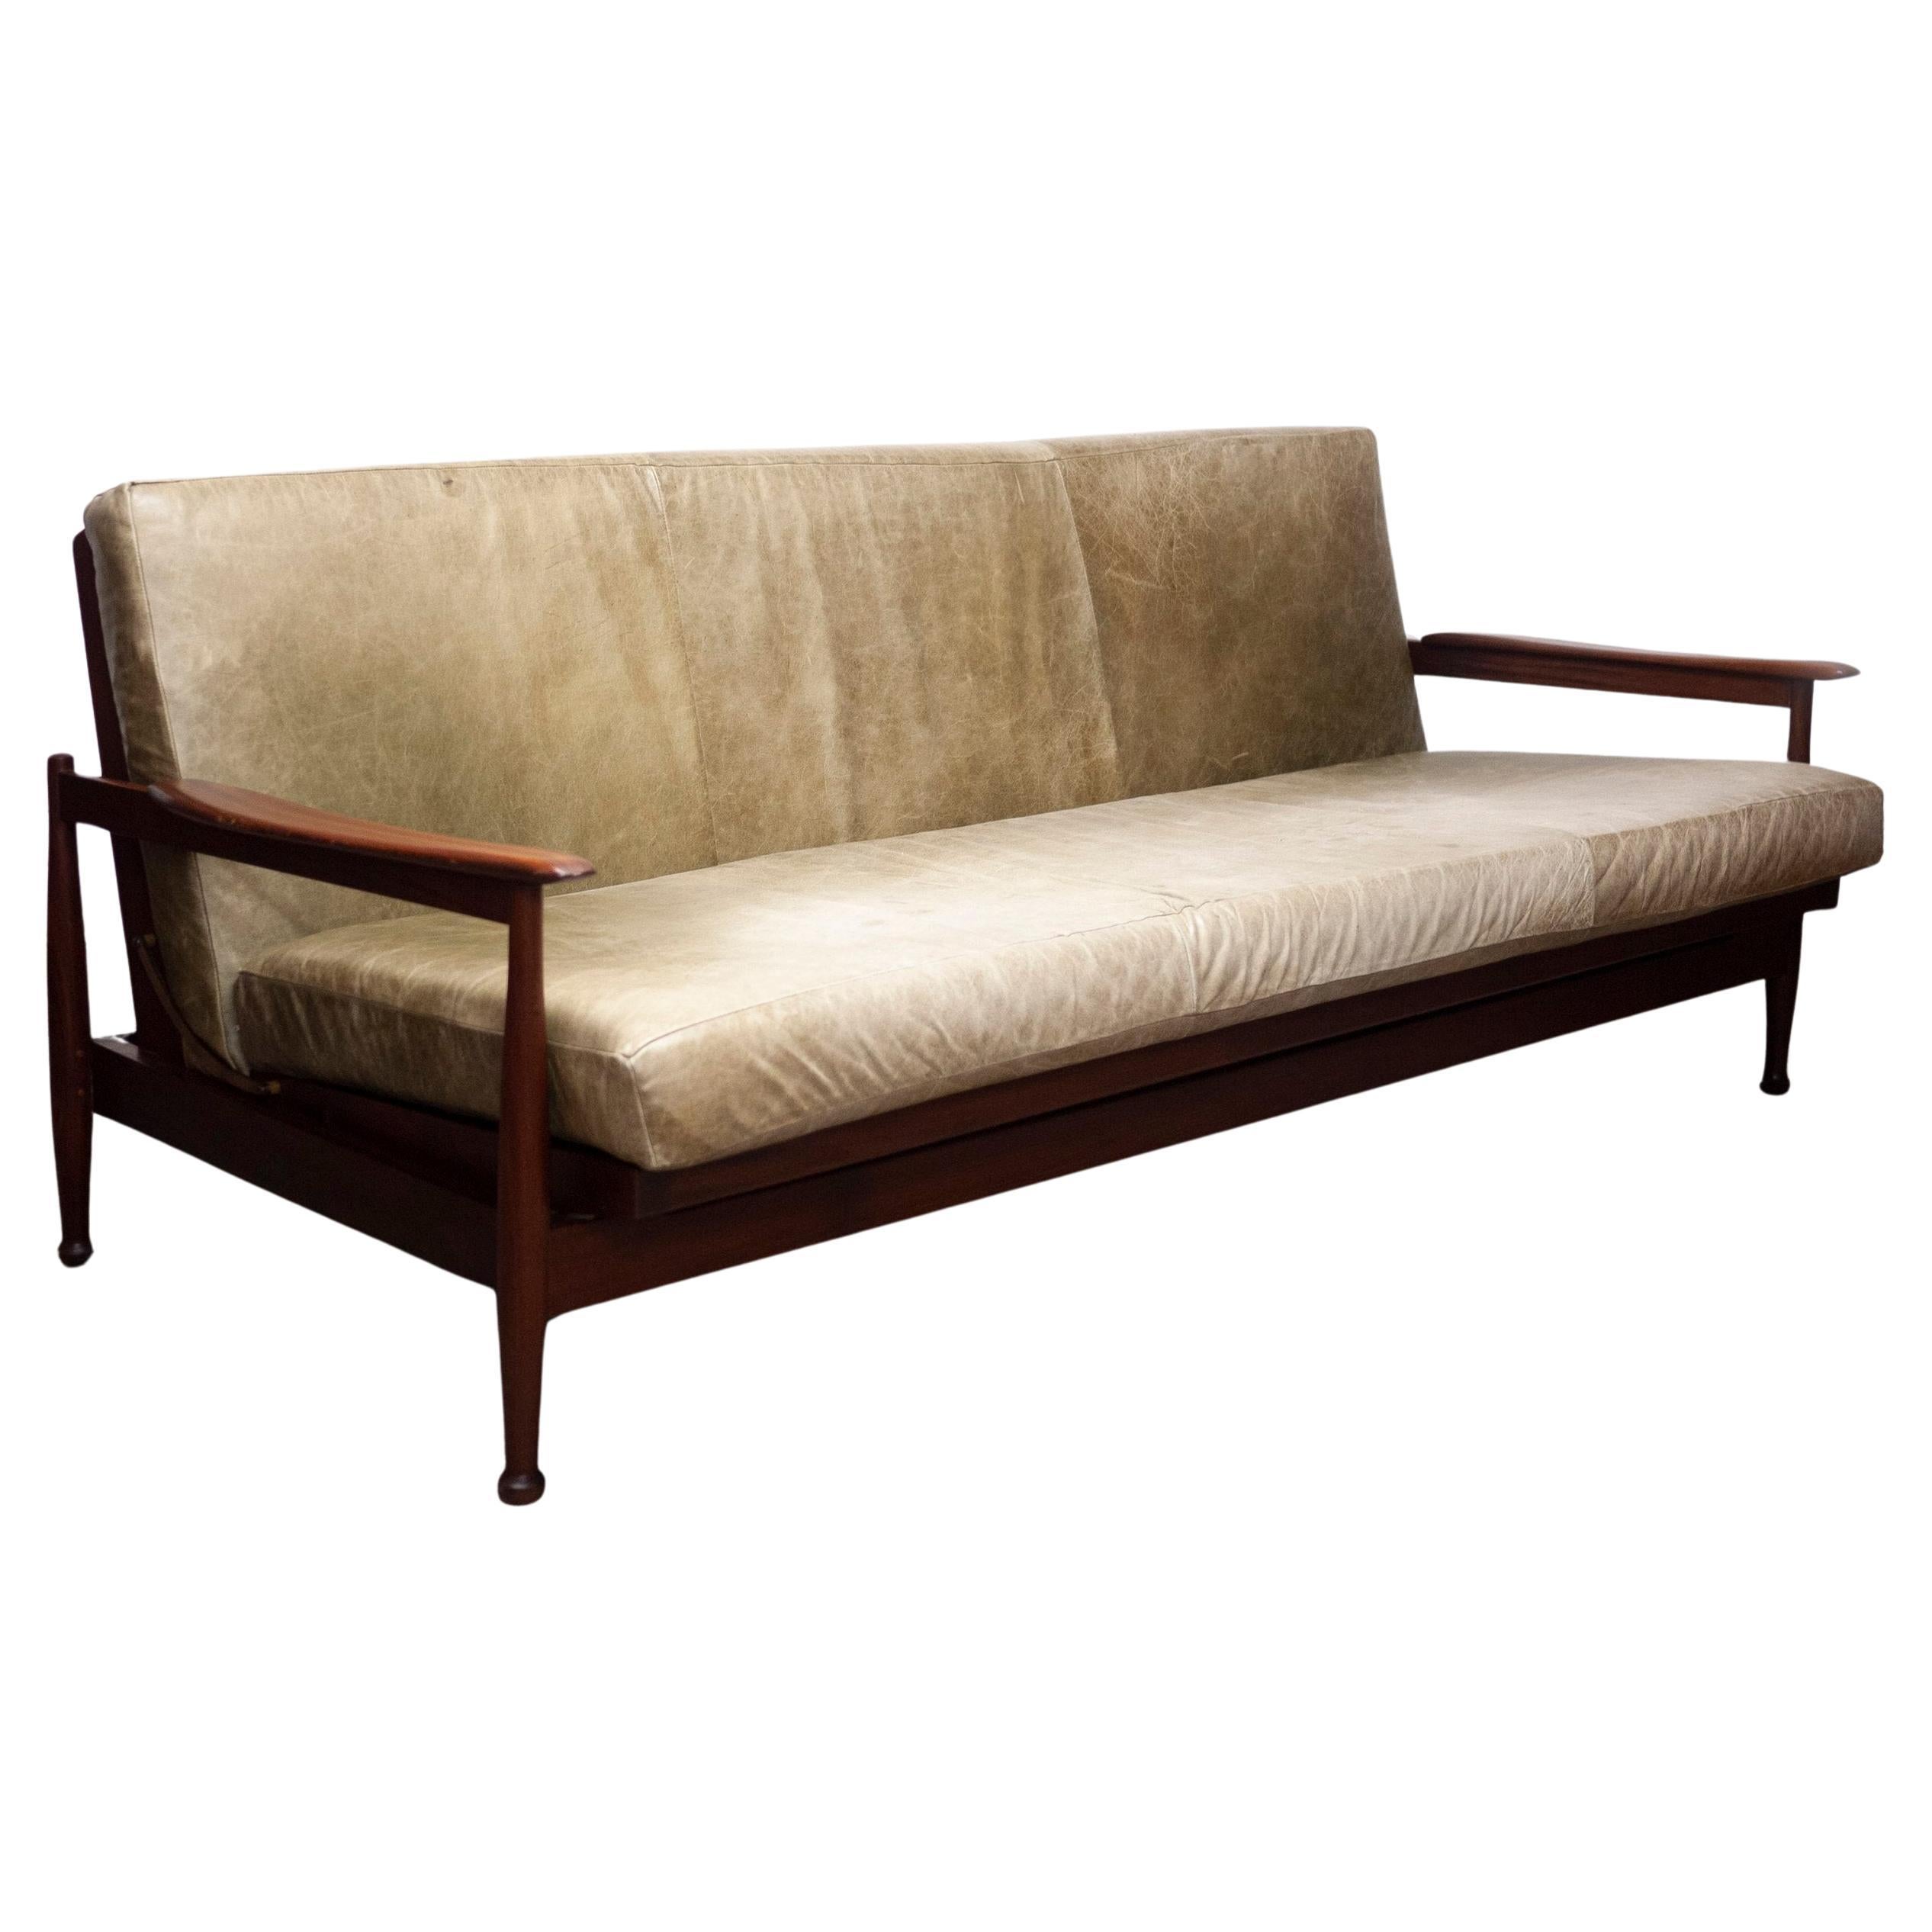 Manhattan Afromosia and Green Leather Sofa Bed by Guy Rogers, 1960s For Sale